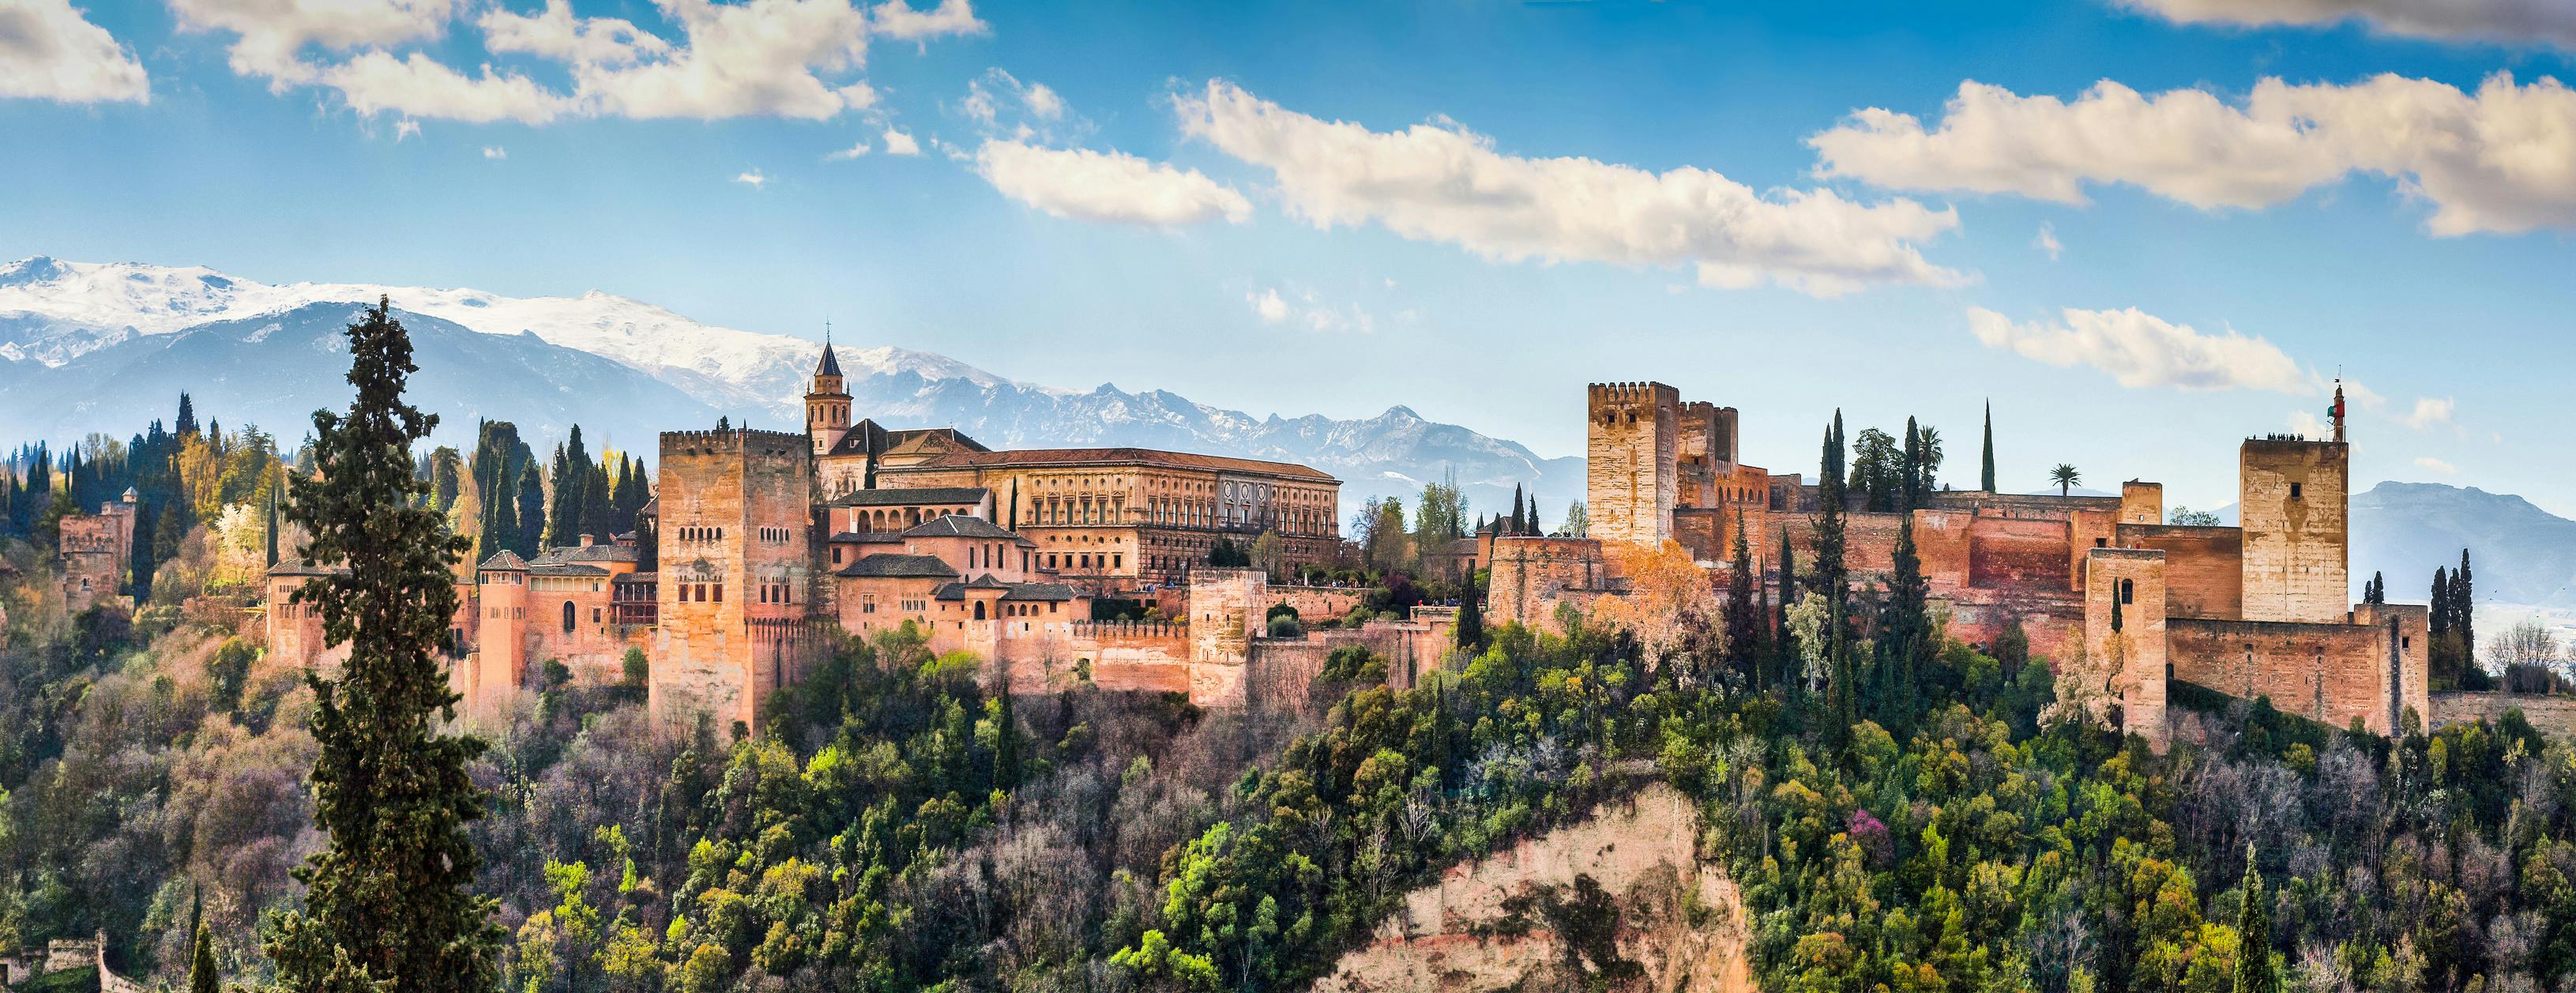 Virtual tour of Alhambra from home